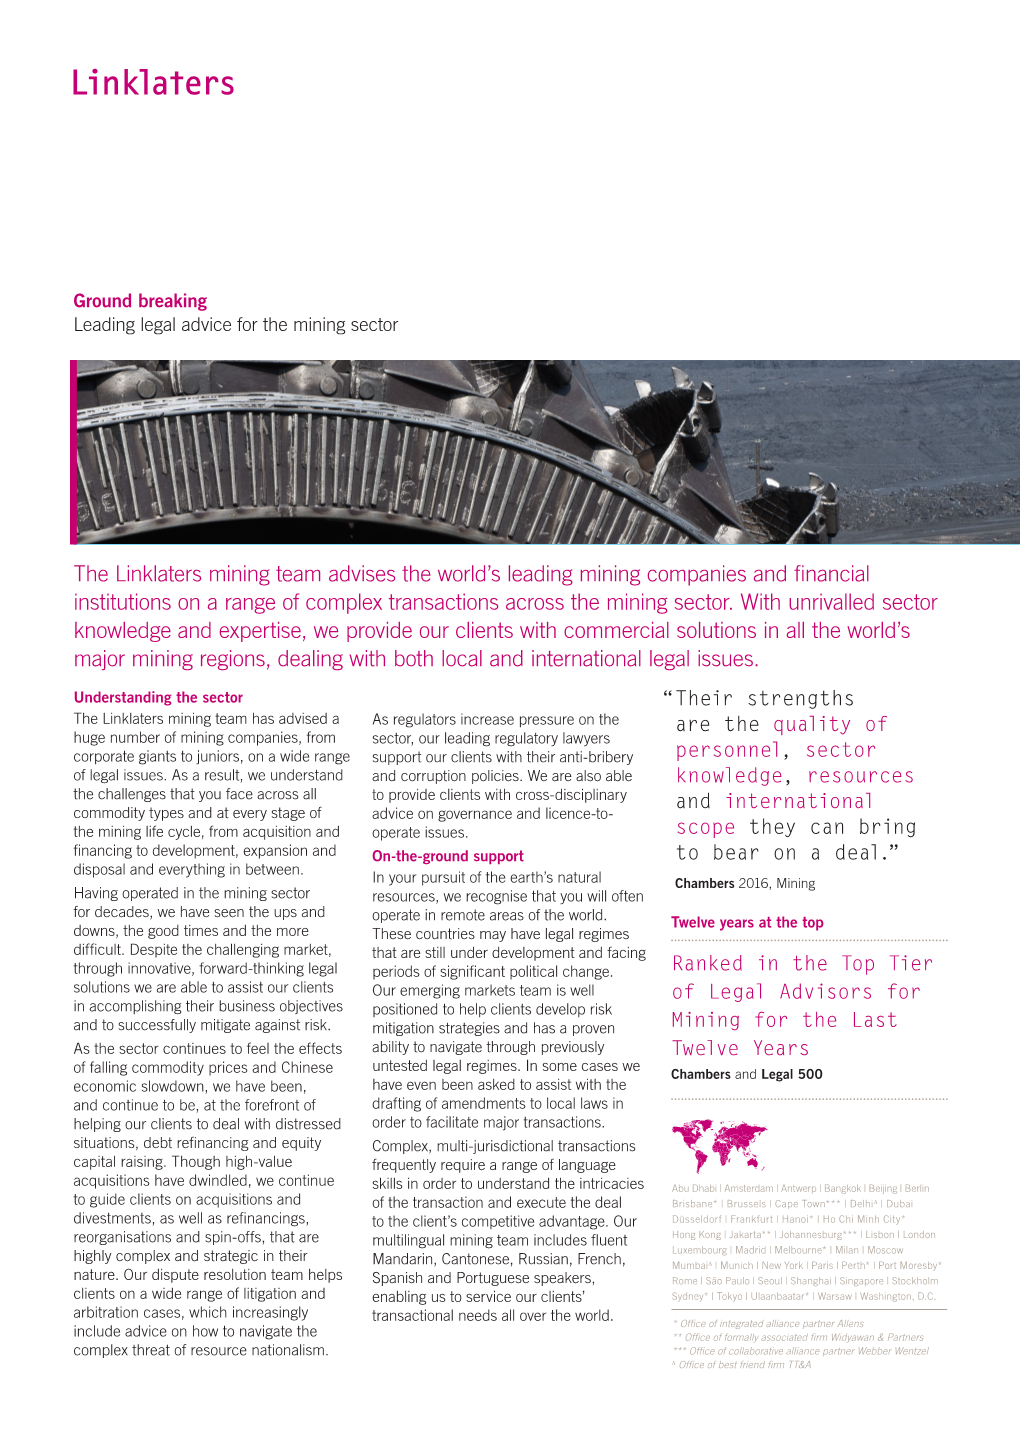 The Linklaters Mining Team Advises the World's Leading Mining